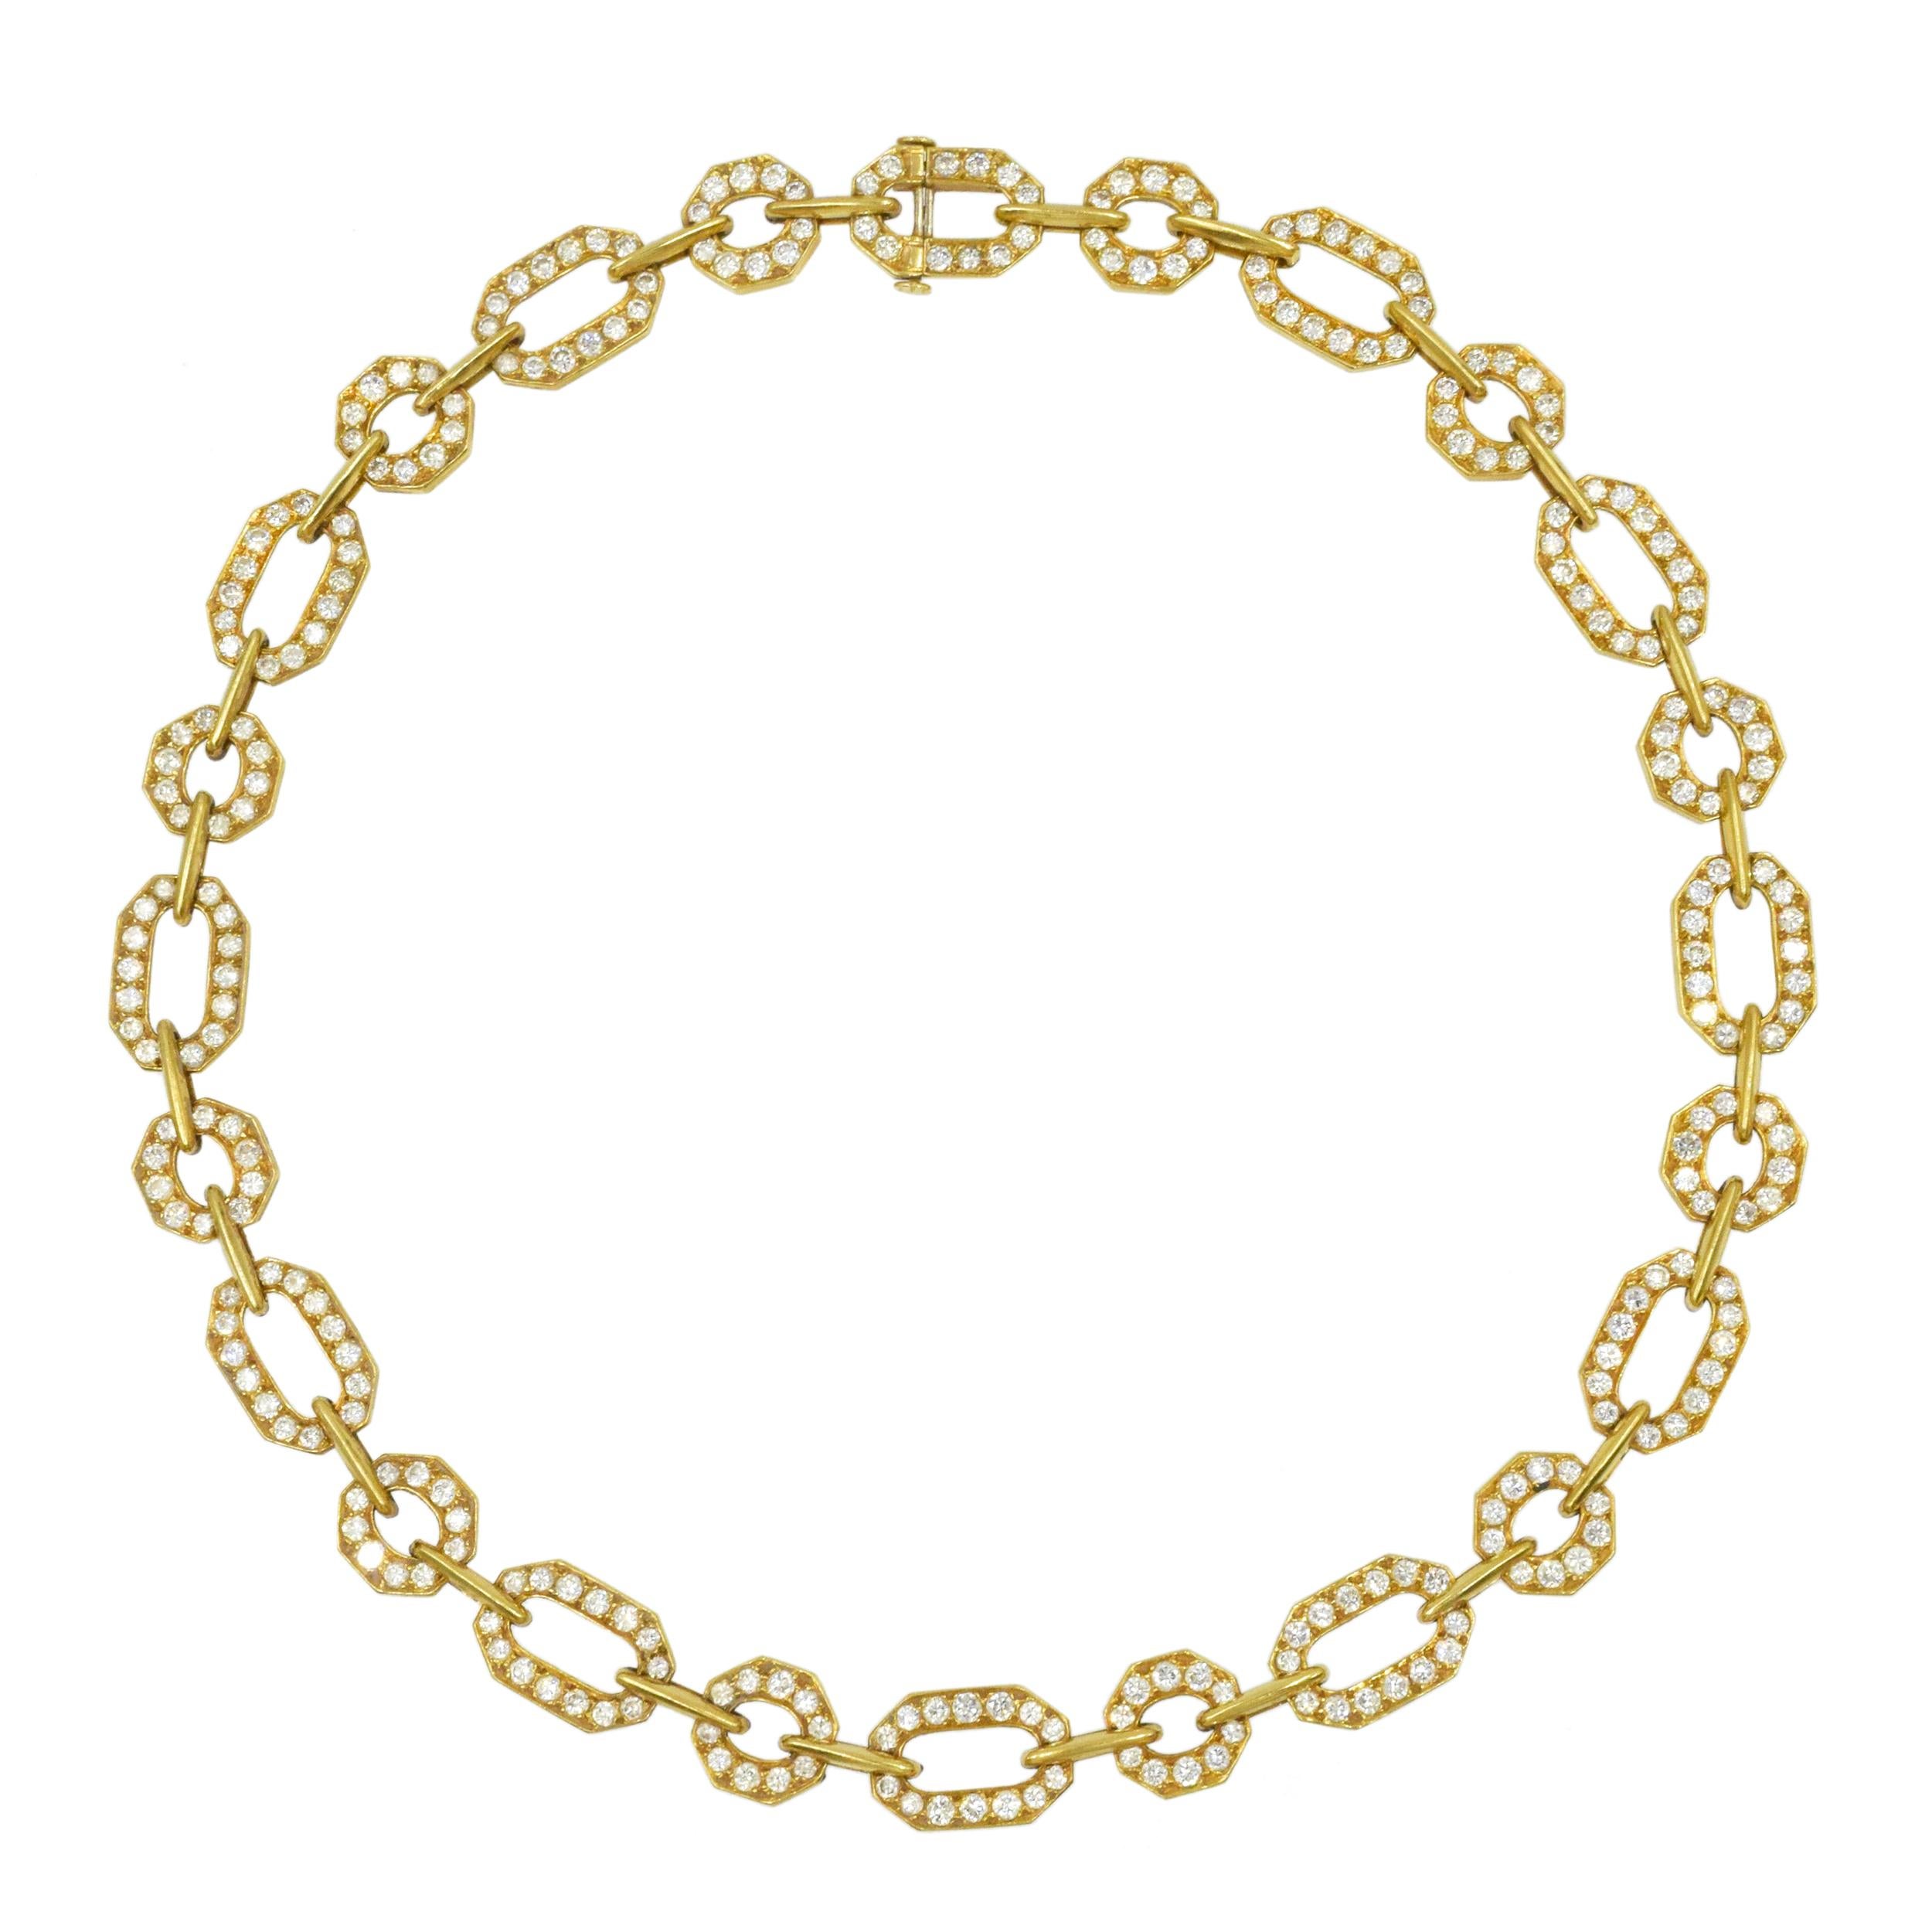 Classic Cartier diamond necklace in 18k yellow gold. The necklace alternates round and oval shaped links encrusted  with 288 round brilliant cut diamonds, with total weight approx;. 11.50 carats, color F-G clarity VS 
Inscribed: Cartier, xxxxx,